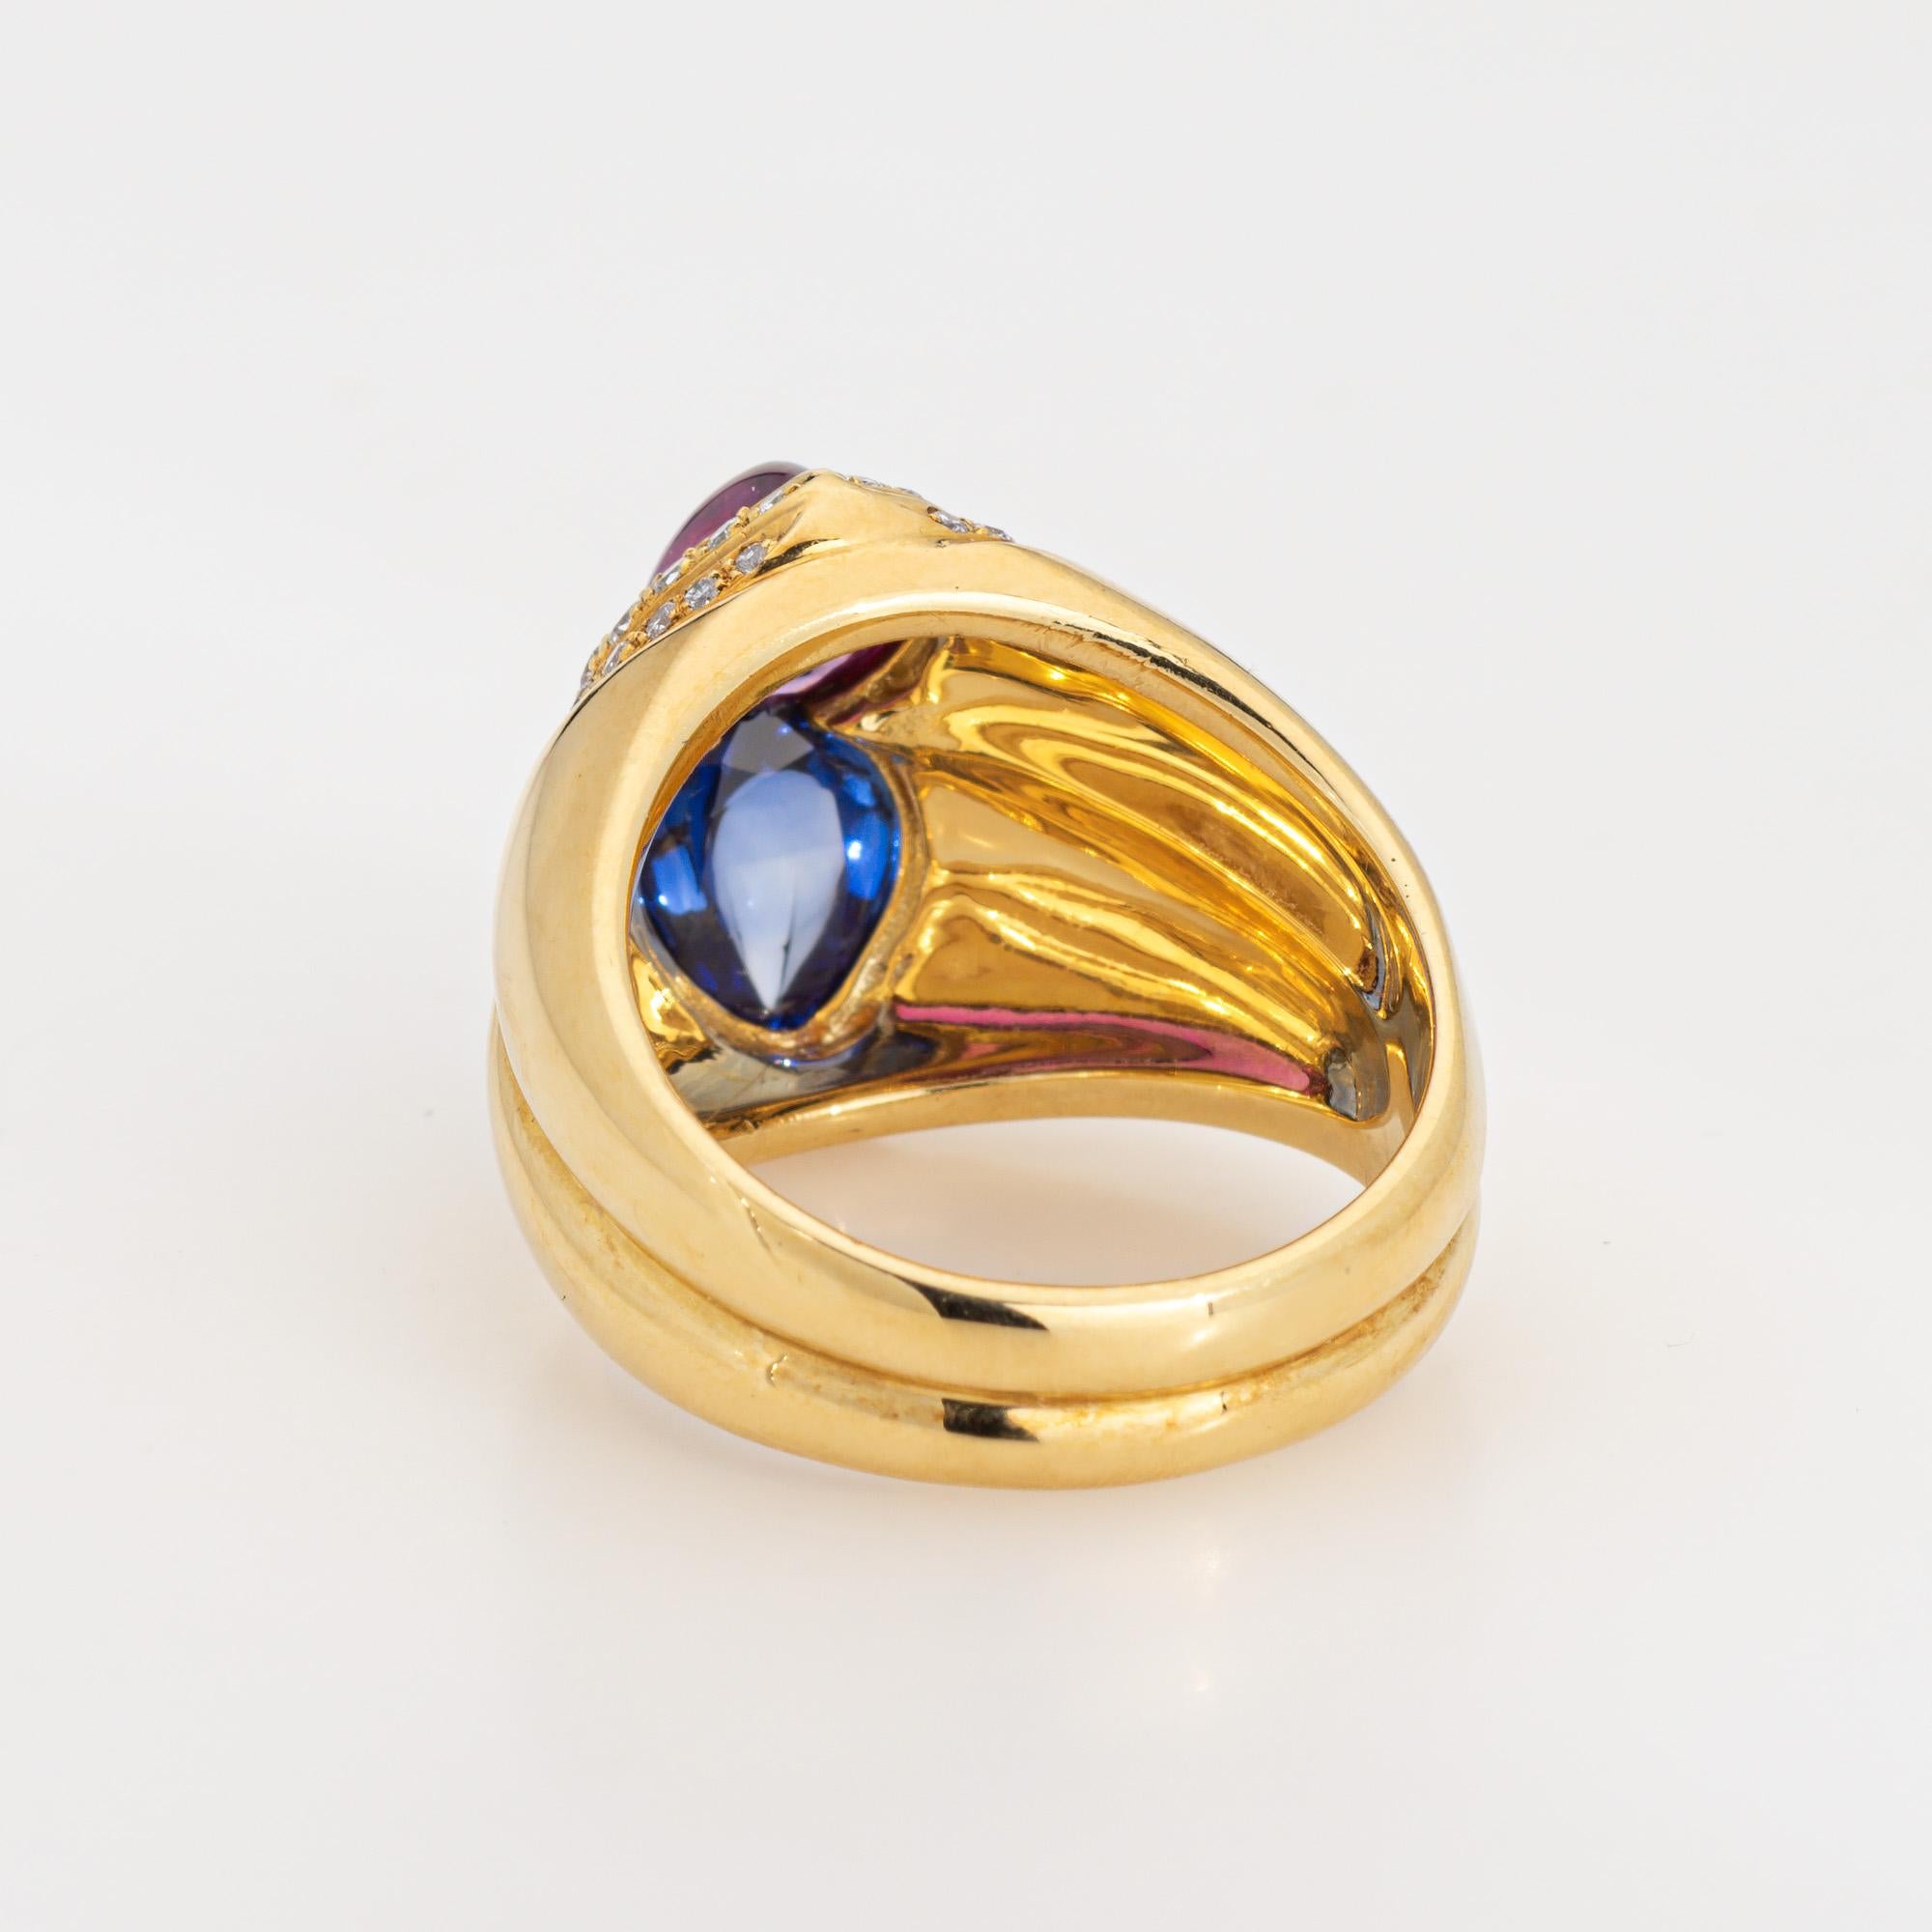 Chopard Pink Blue Sapphire Ring Diamond Estate 18k Yellow Gold Sz 6 Band Signed In Good Condition For Sale In Torrance, CA